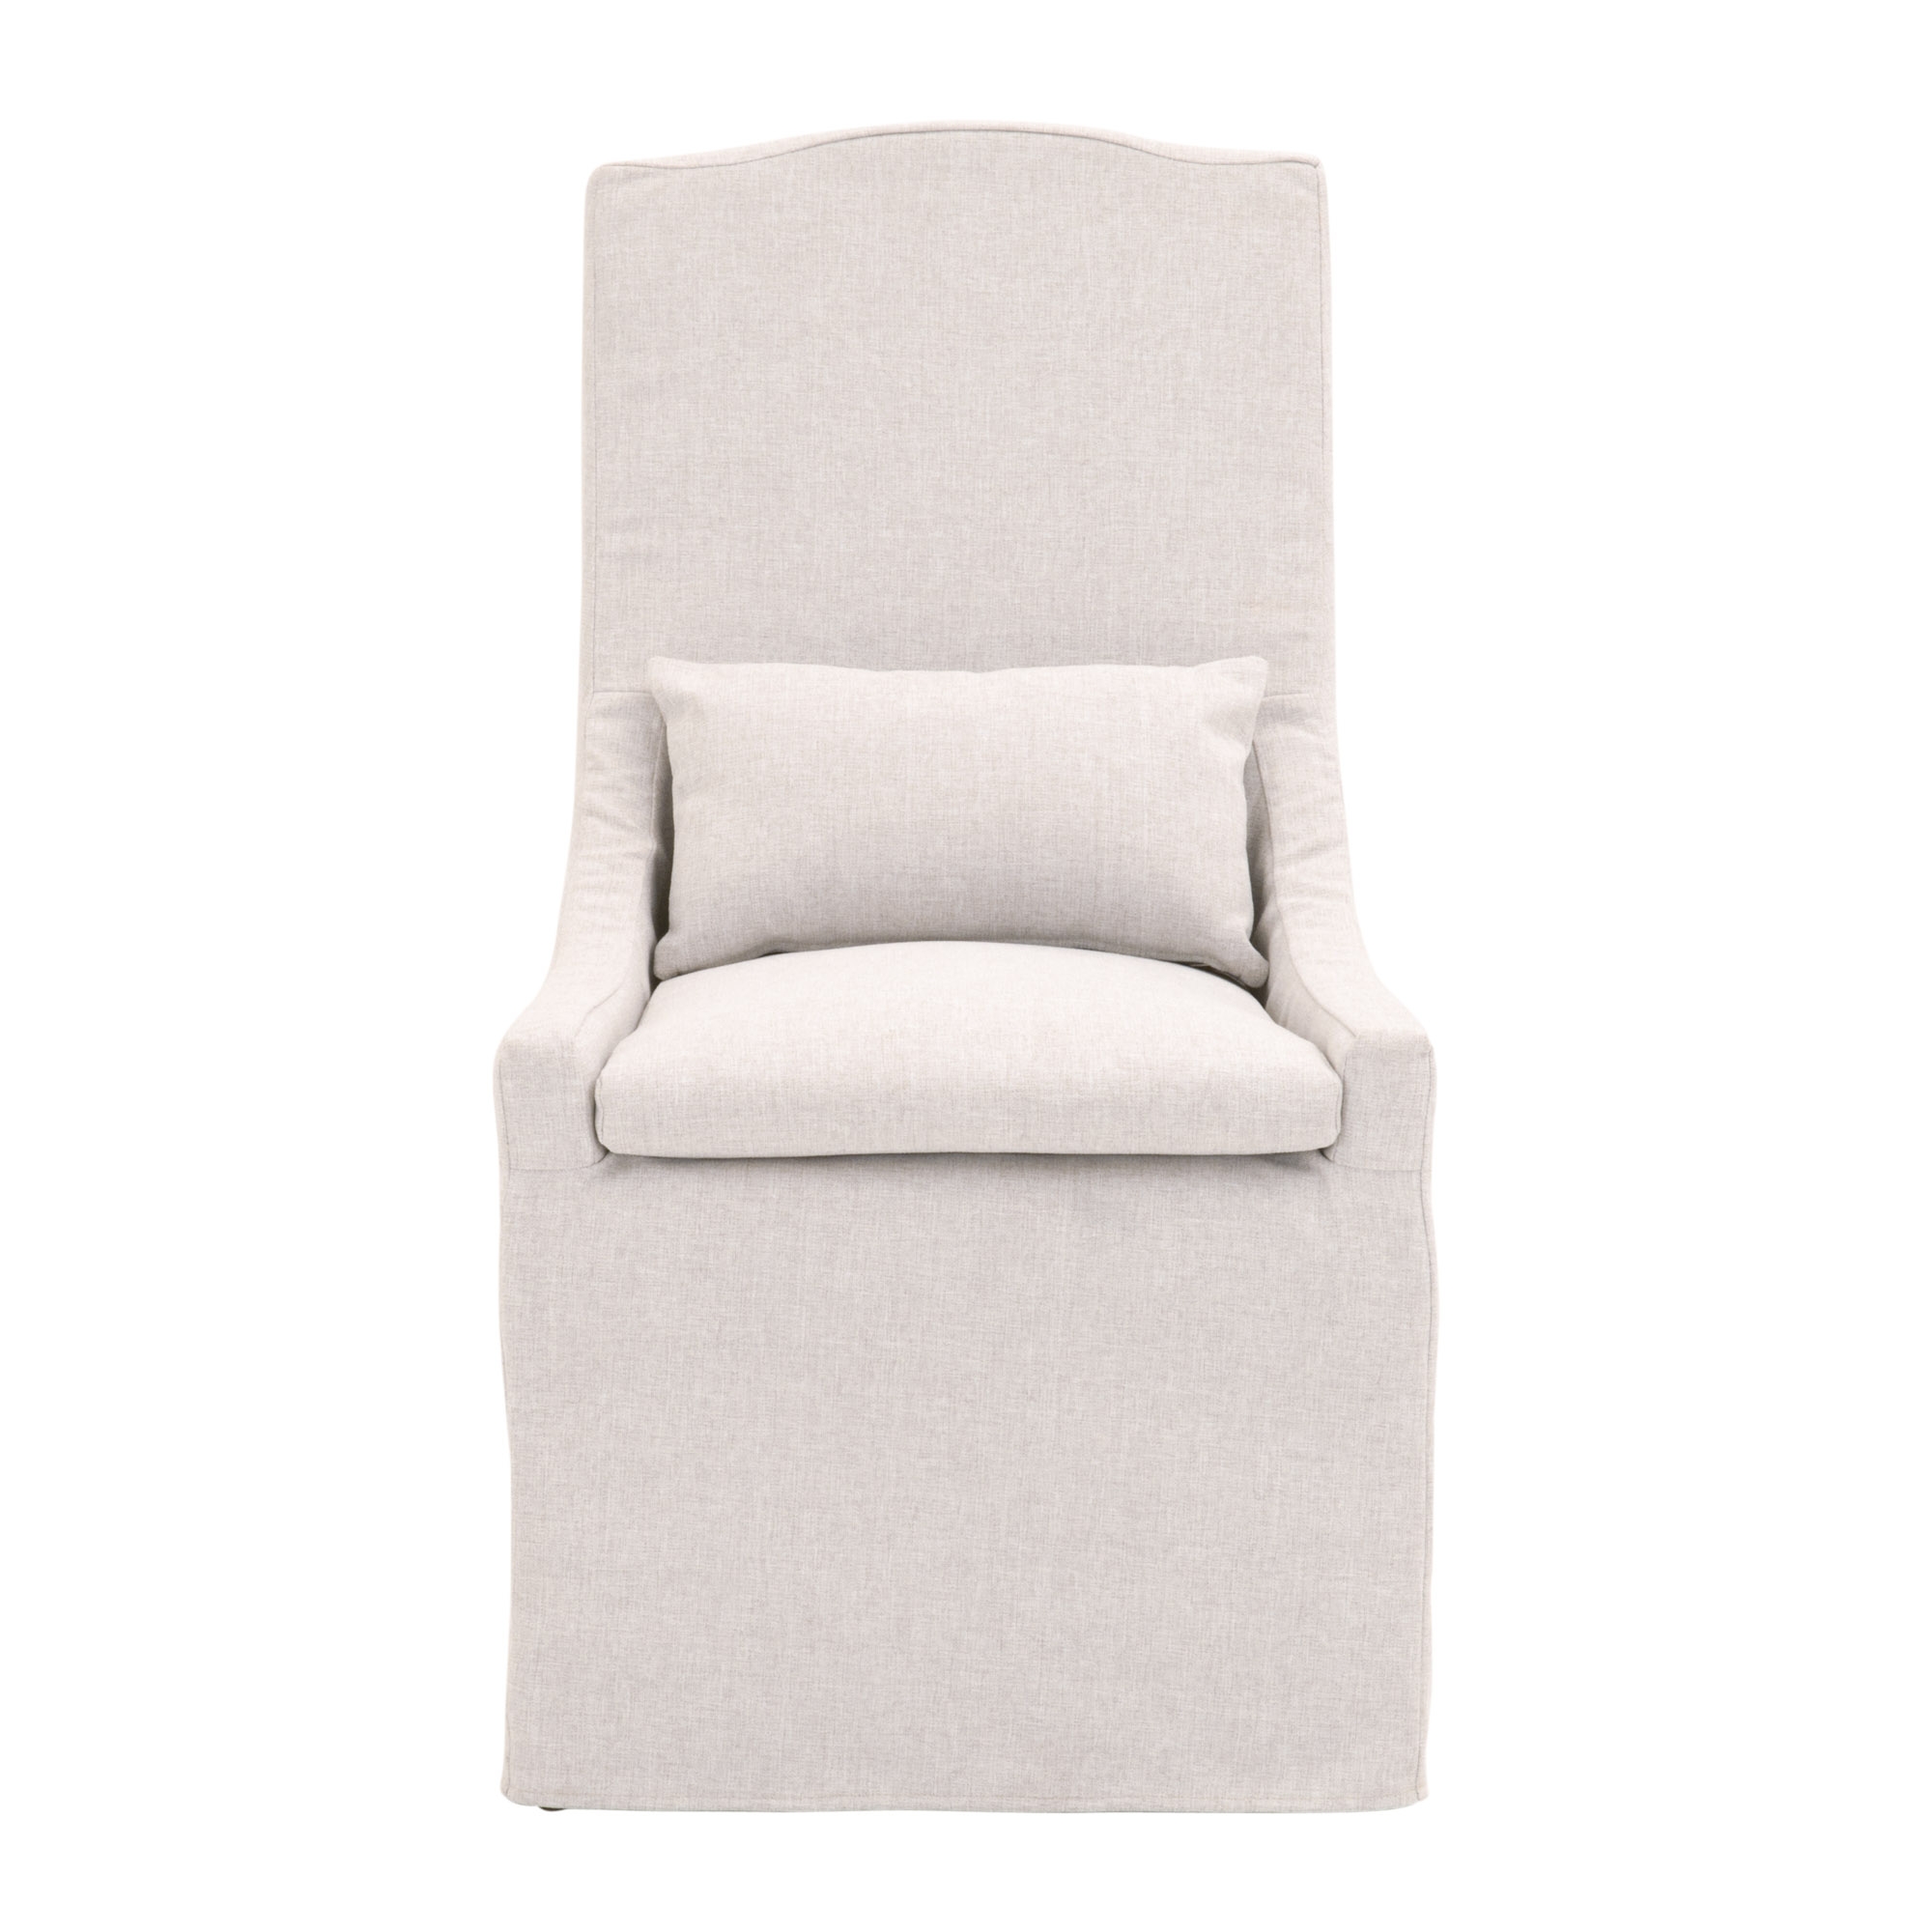 Odessa Outdoor Slipcover Dining Chair, White - Image 1